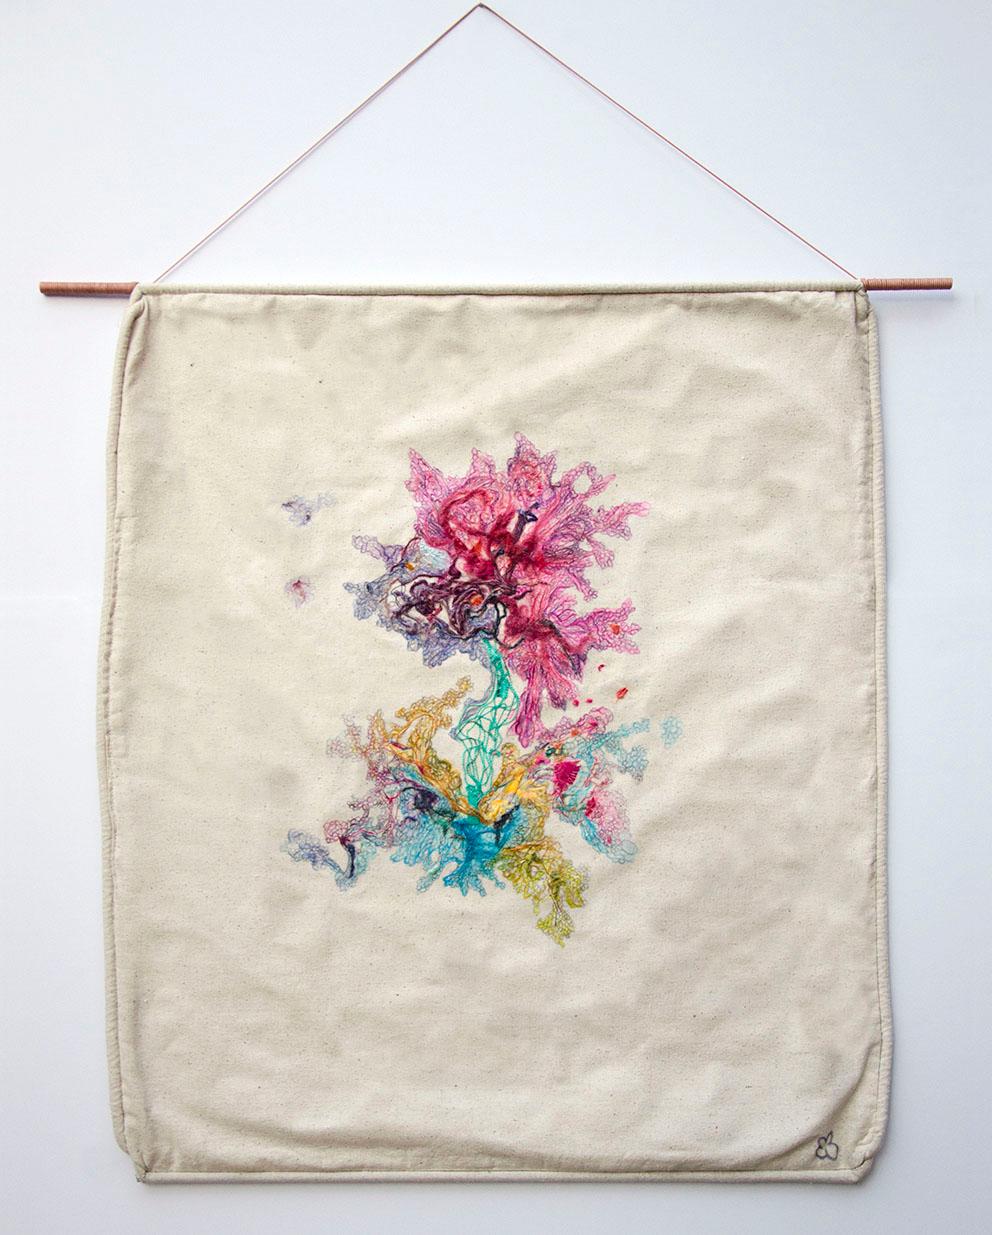 She of Life (fiber art, embroidery, textile art, wall hanging, pastel colours)